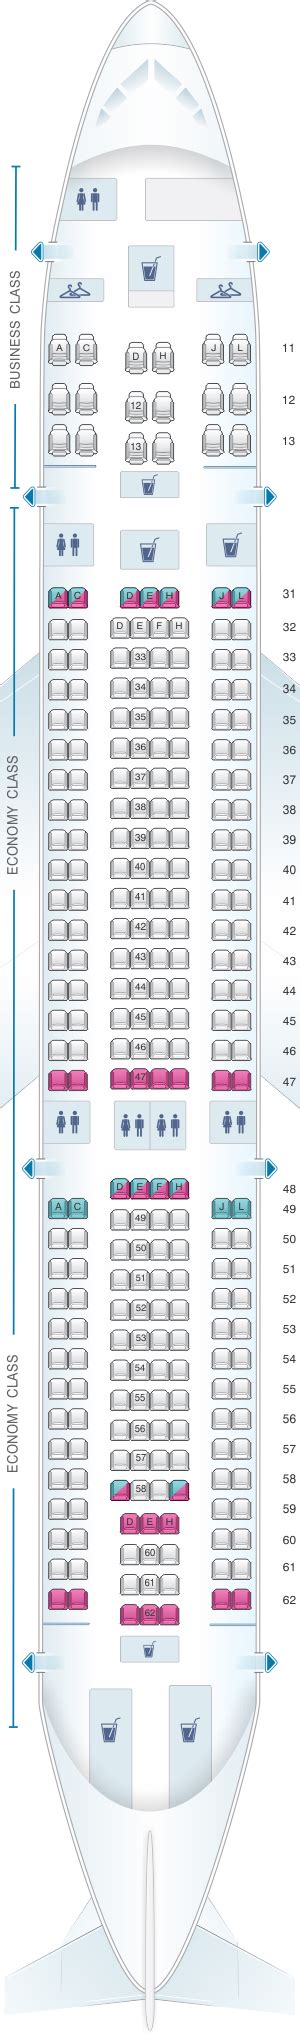 Seat Map Airberlin Airbus A330 200 Config2 Seatmaestro Images And